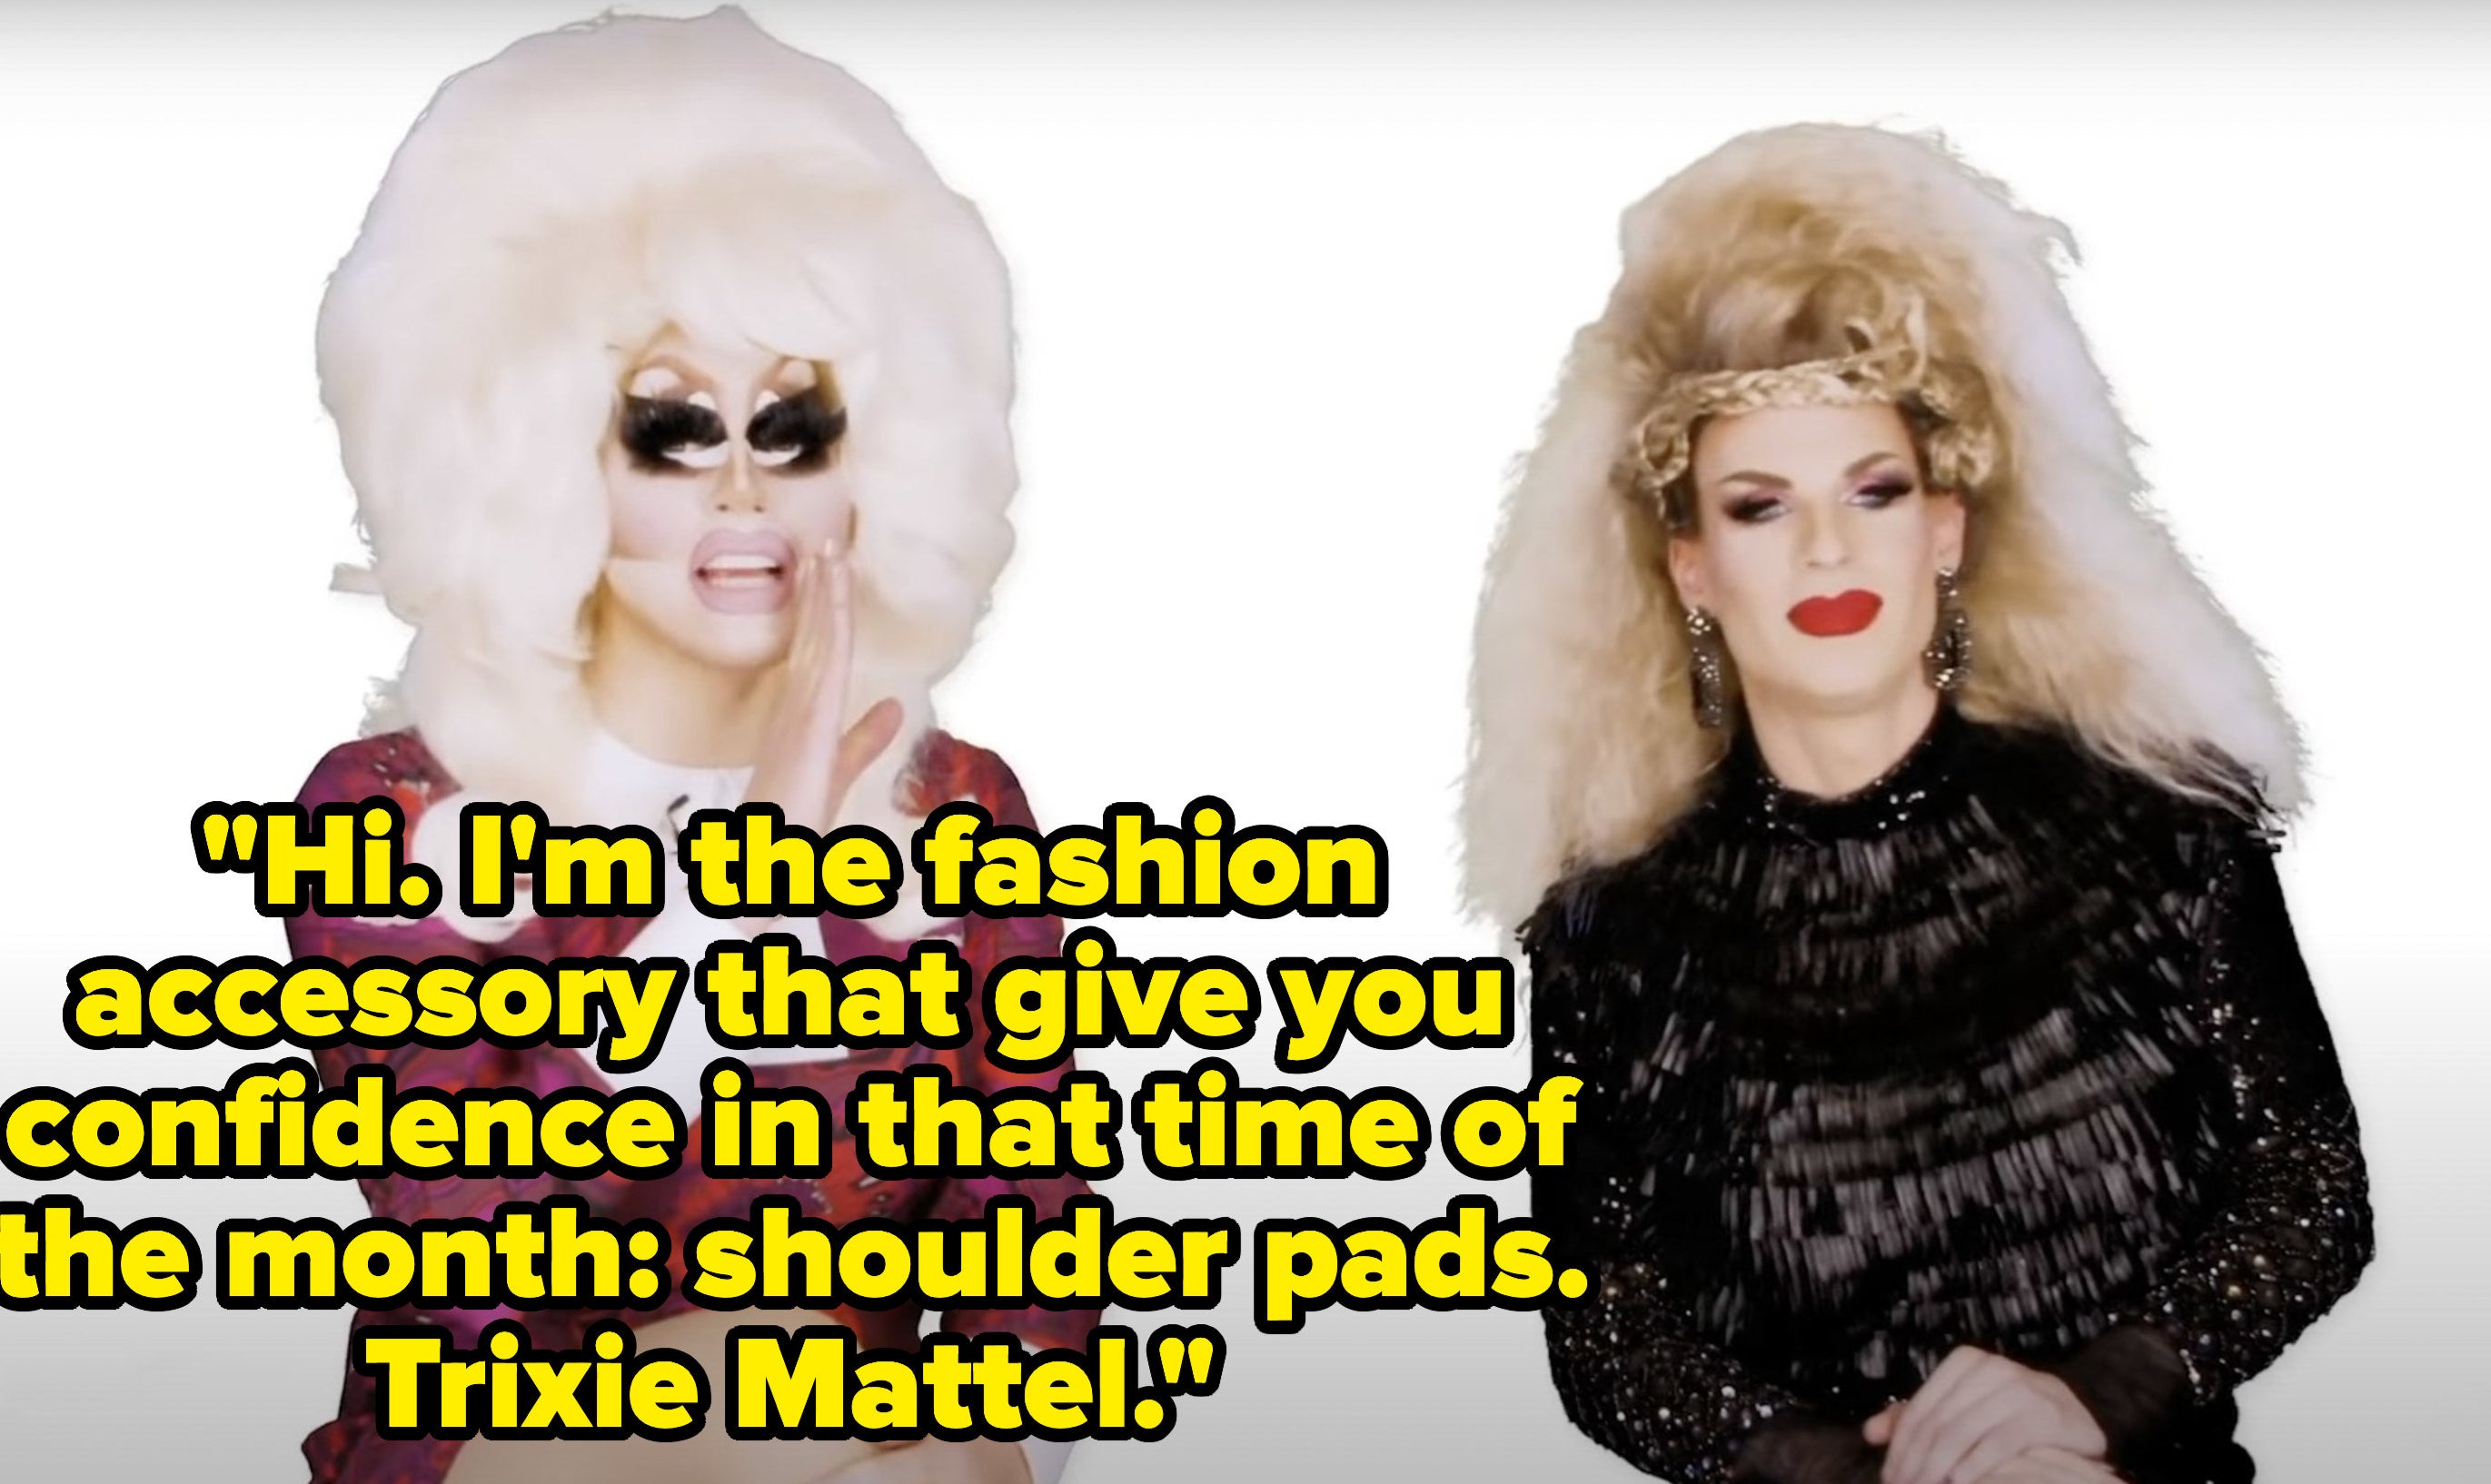 Trixie says, Hi, Im the fashion accessory that give you confidence in that time of the month, shoulder pads, Trixie Mattel